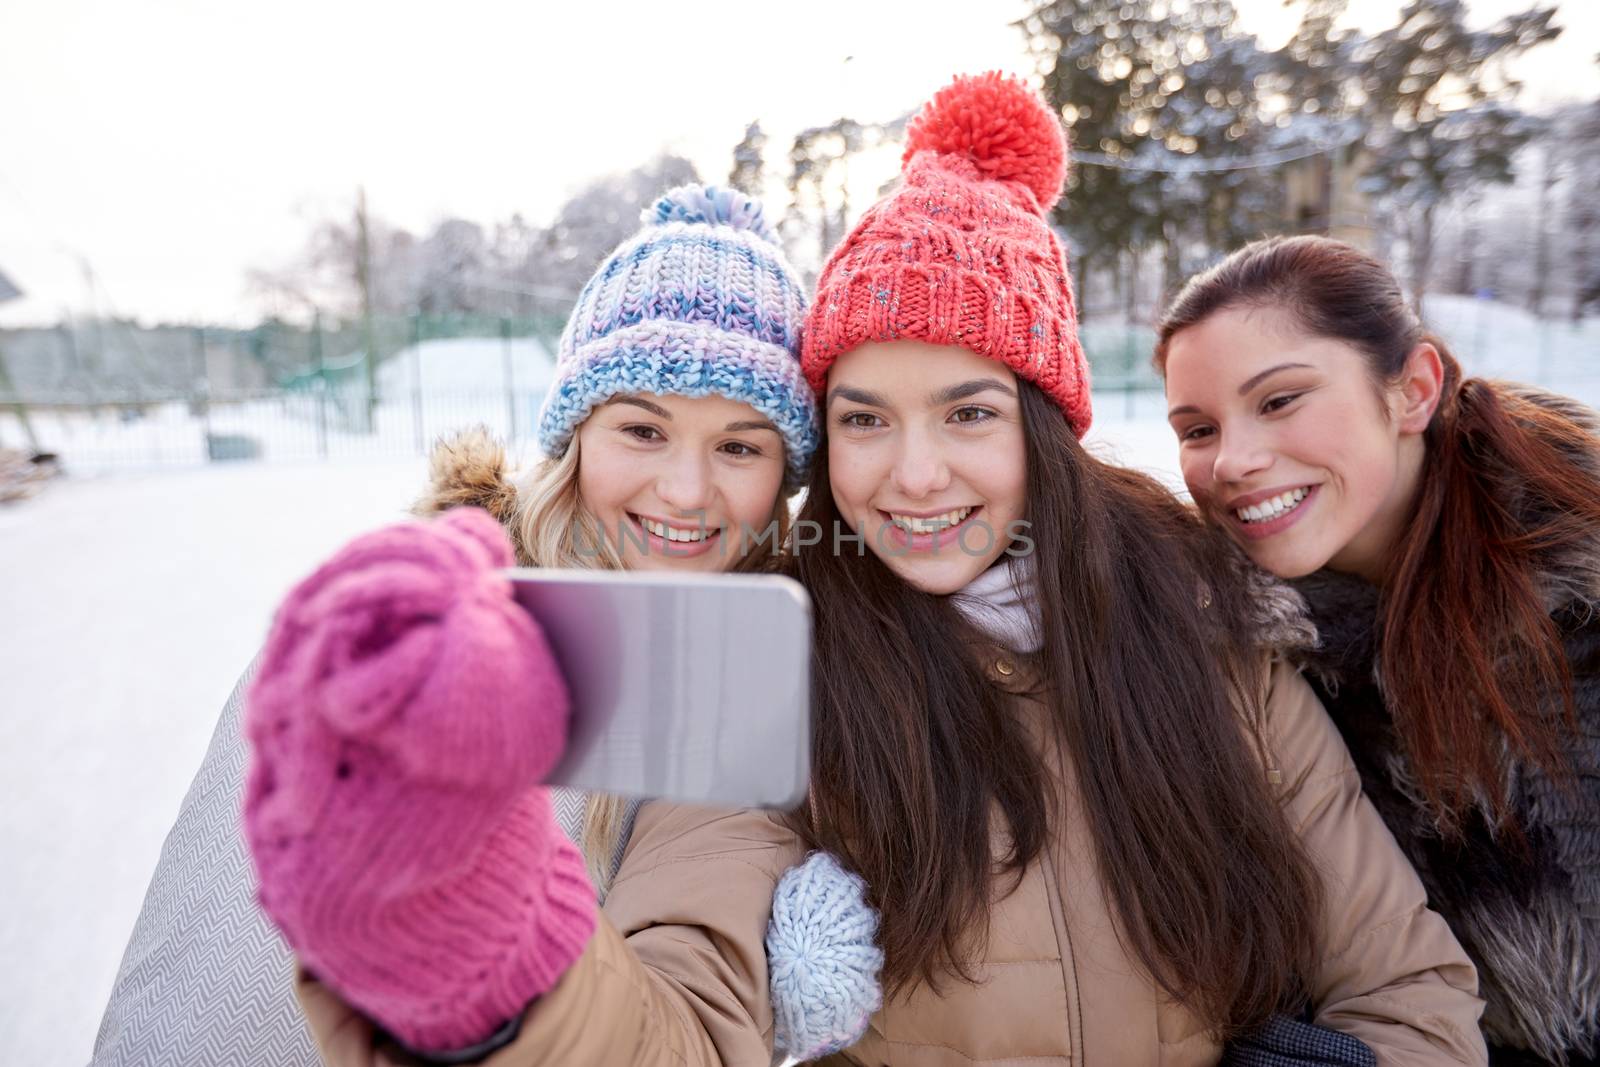 people, friendship, technology, winter and leisure concept - happy teenage girls taking selfie with smartphone outdoors